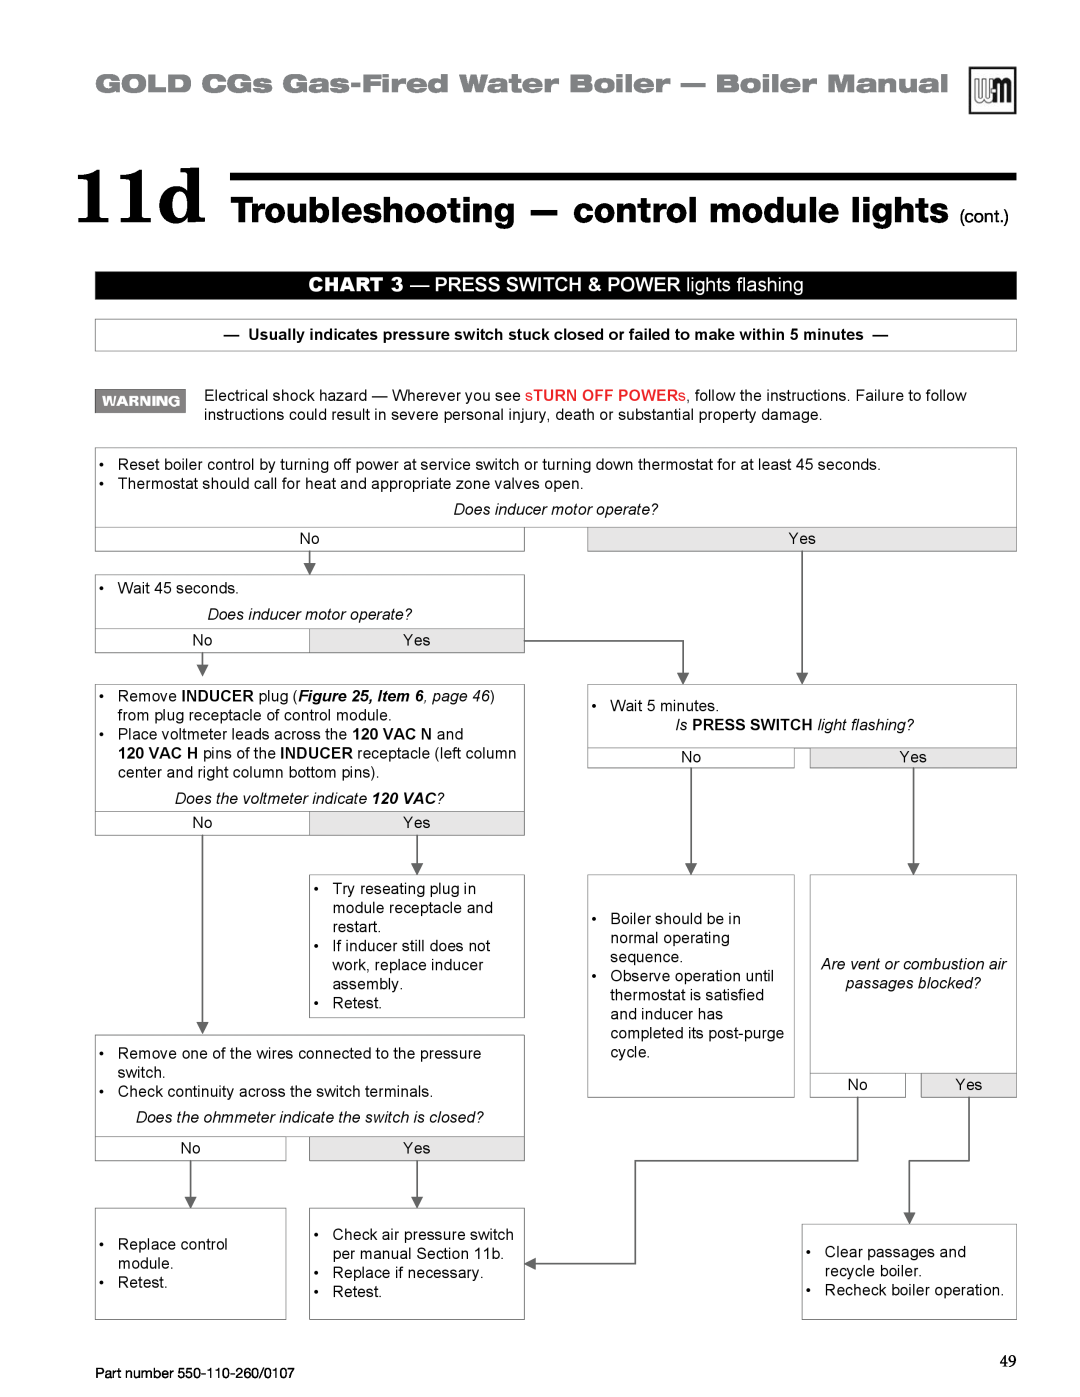 Weil-McLain 550-110-260/0107 manual 11d Troubleshooting — control module lights cont, Does inducer motor operate? 